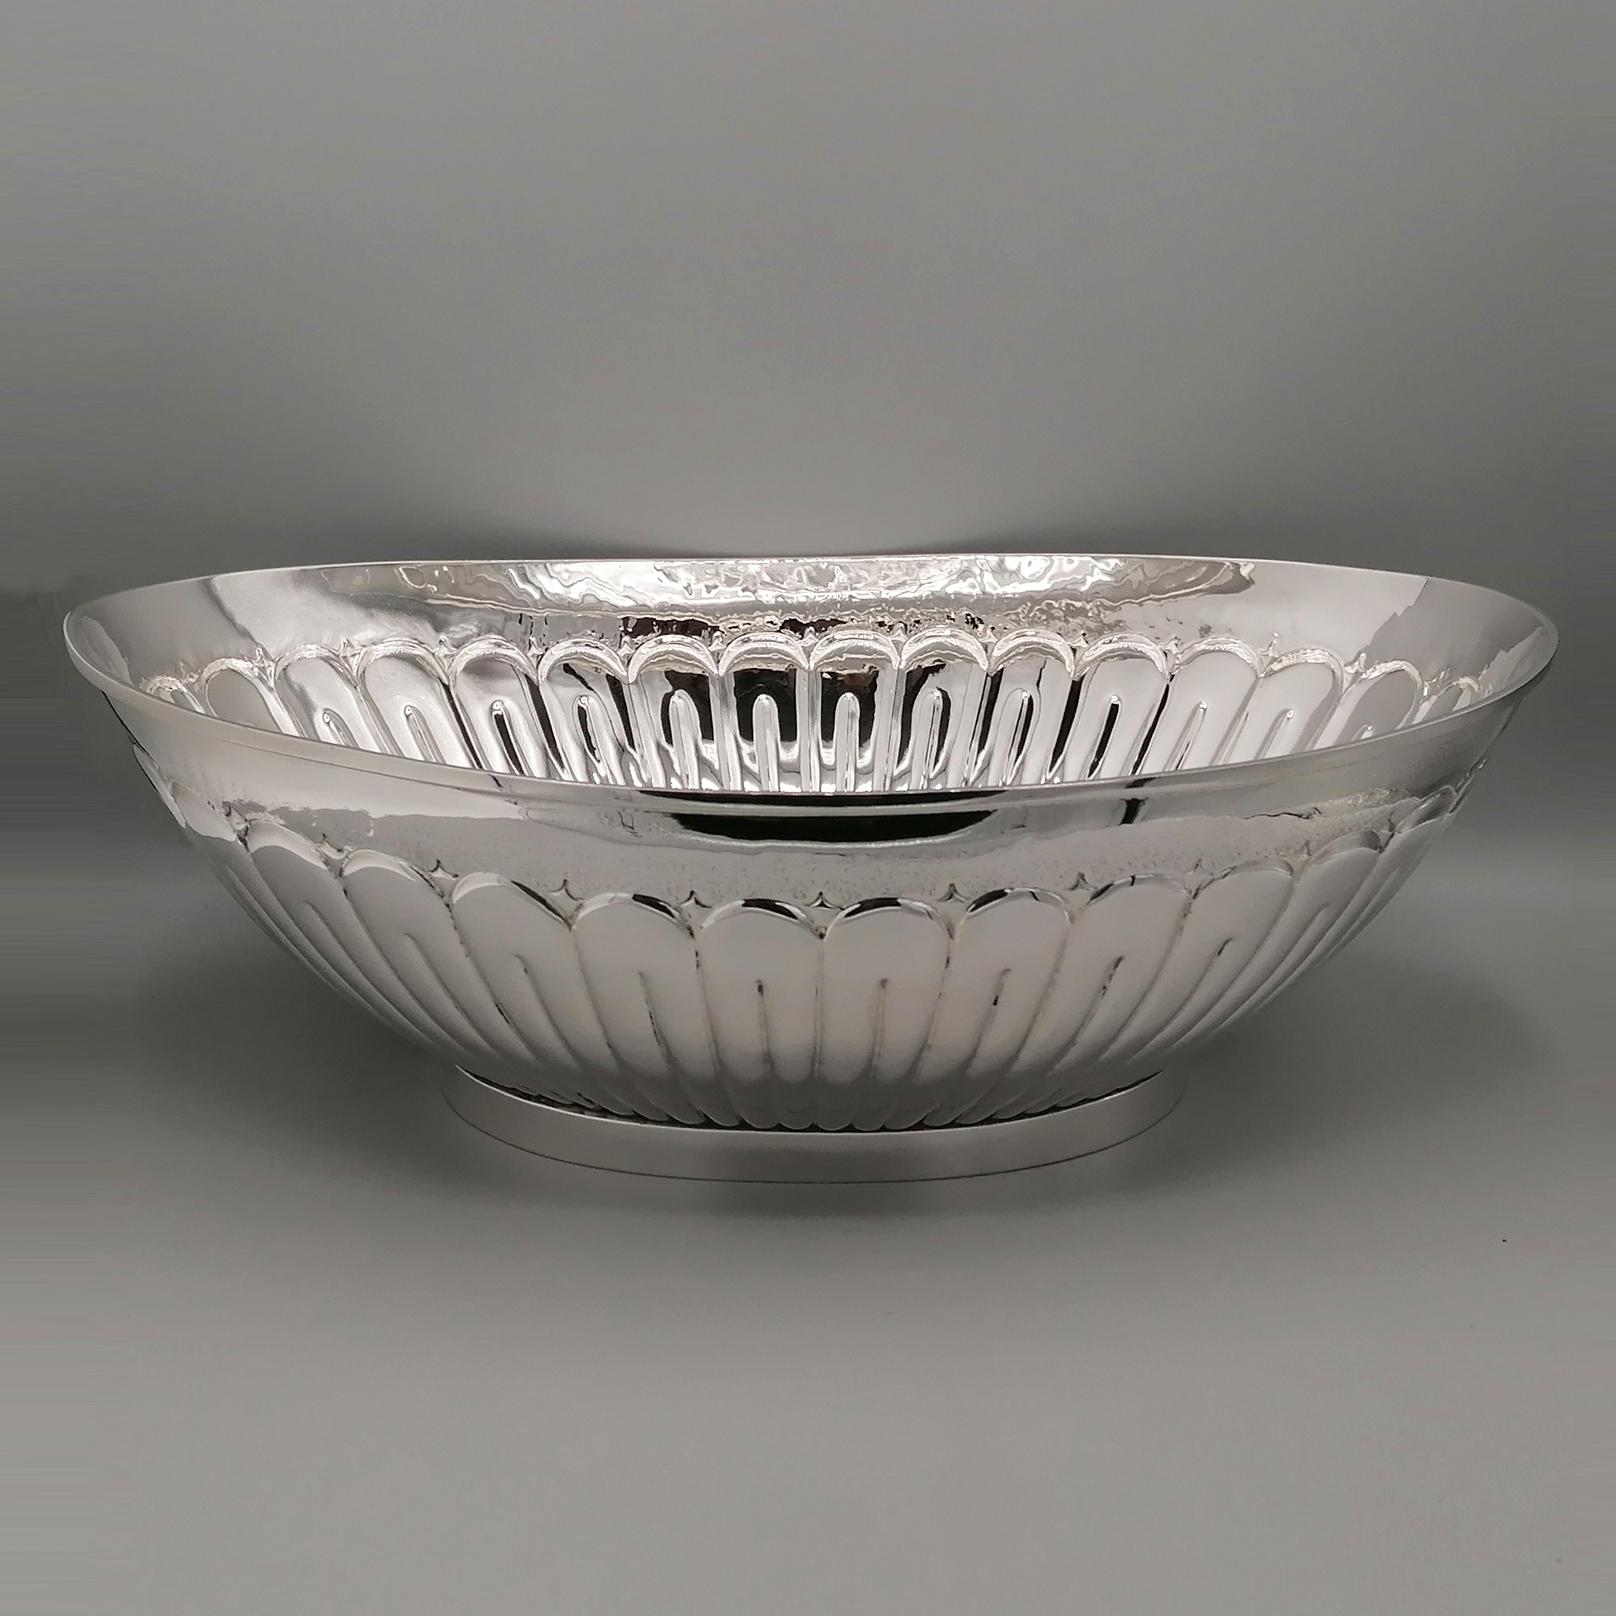 Oval centerpiece in solid 800 silver.
The body, very well proportioned and balanced in its shapes and lines, has been embossed with pod motifs.
The embossment was executed in an exemplary way, so much so that it appears very precise and elegant even